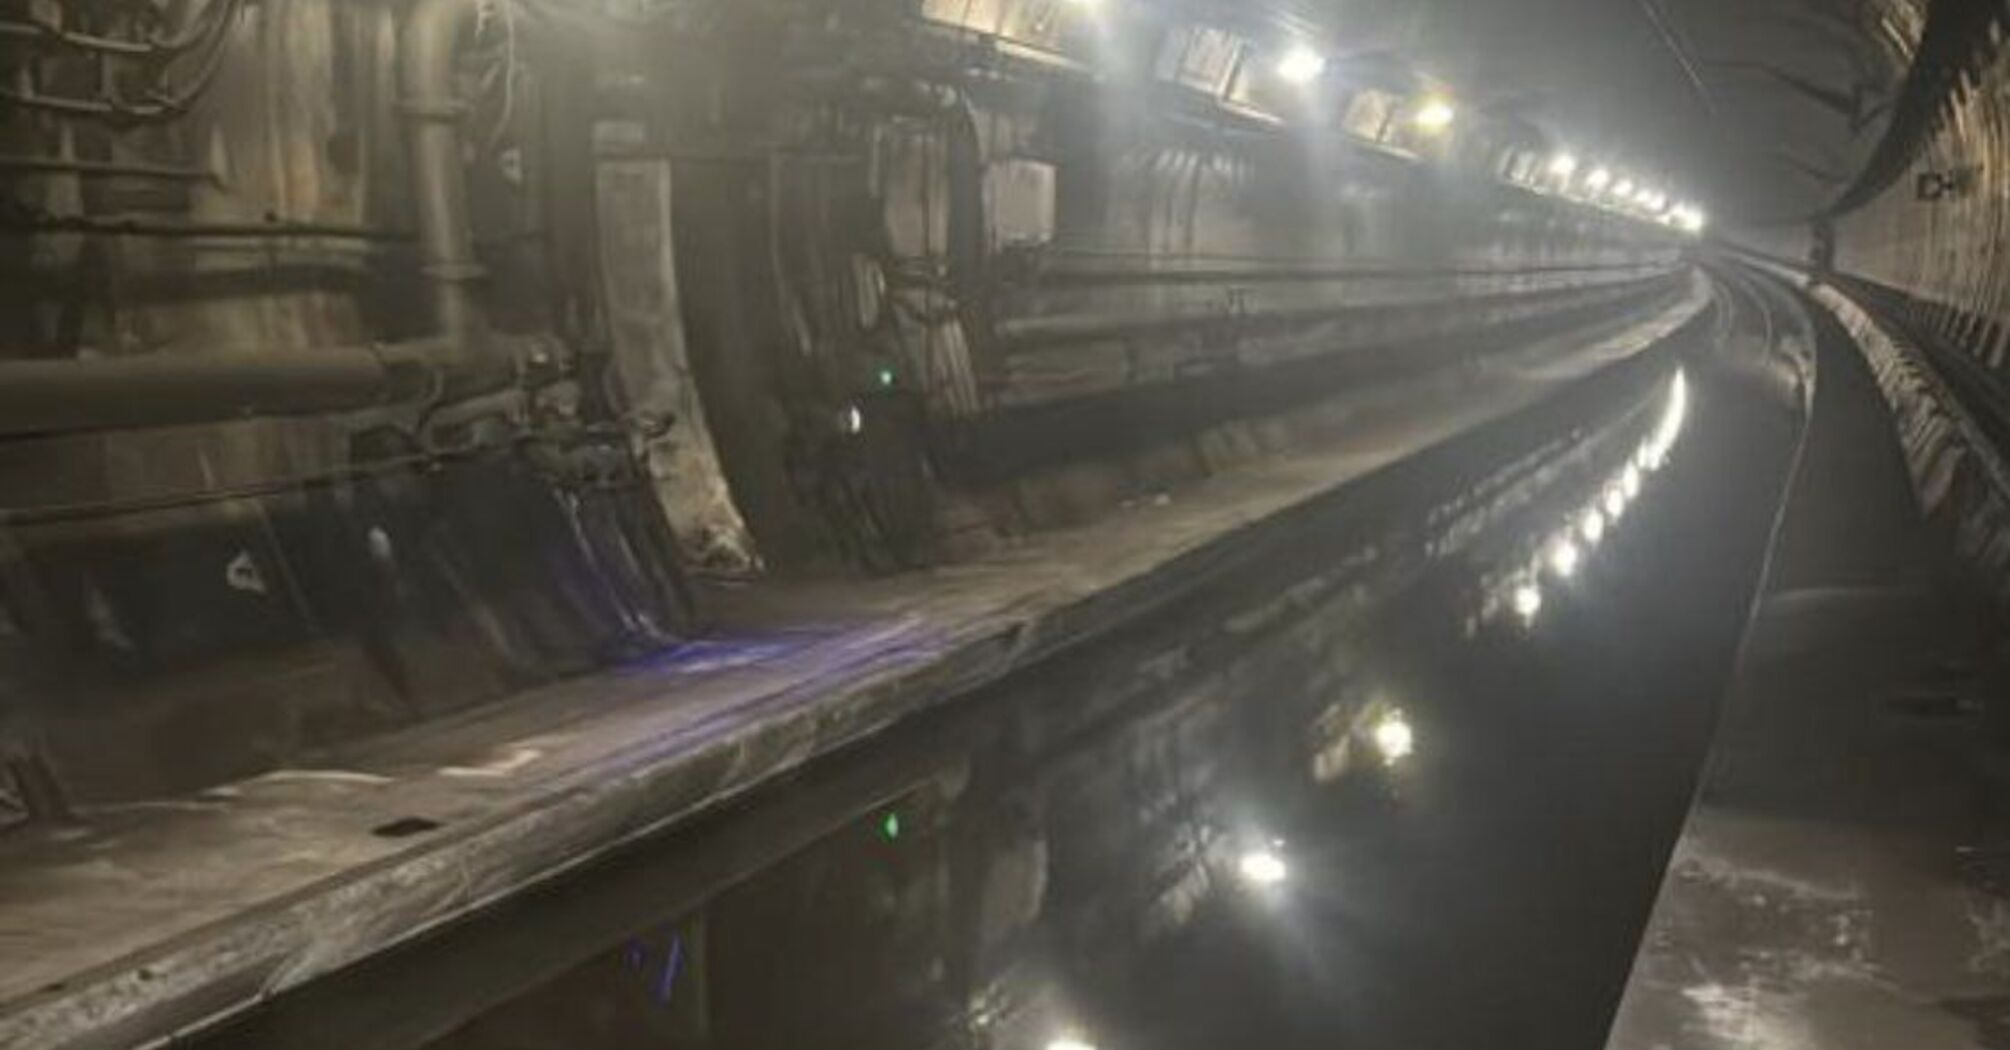 Thousands of train passengers stuck in London on New Year's Eve due to flooded tunnels